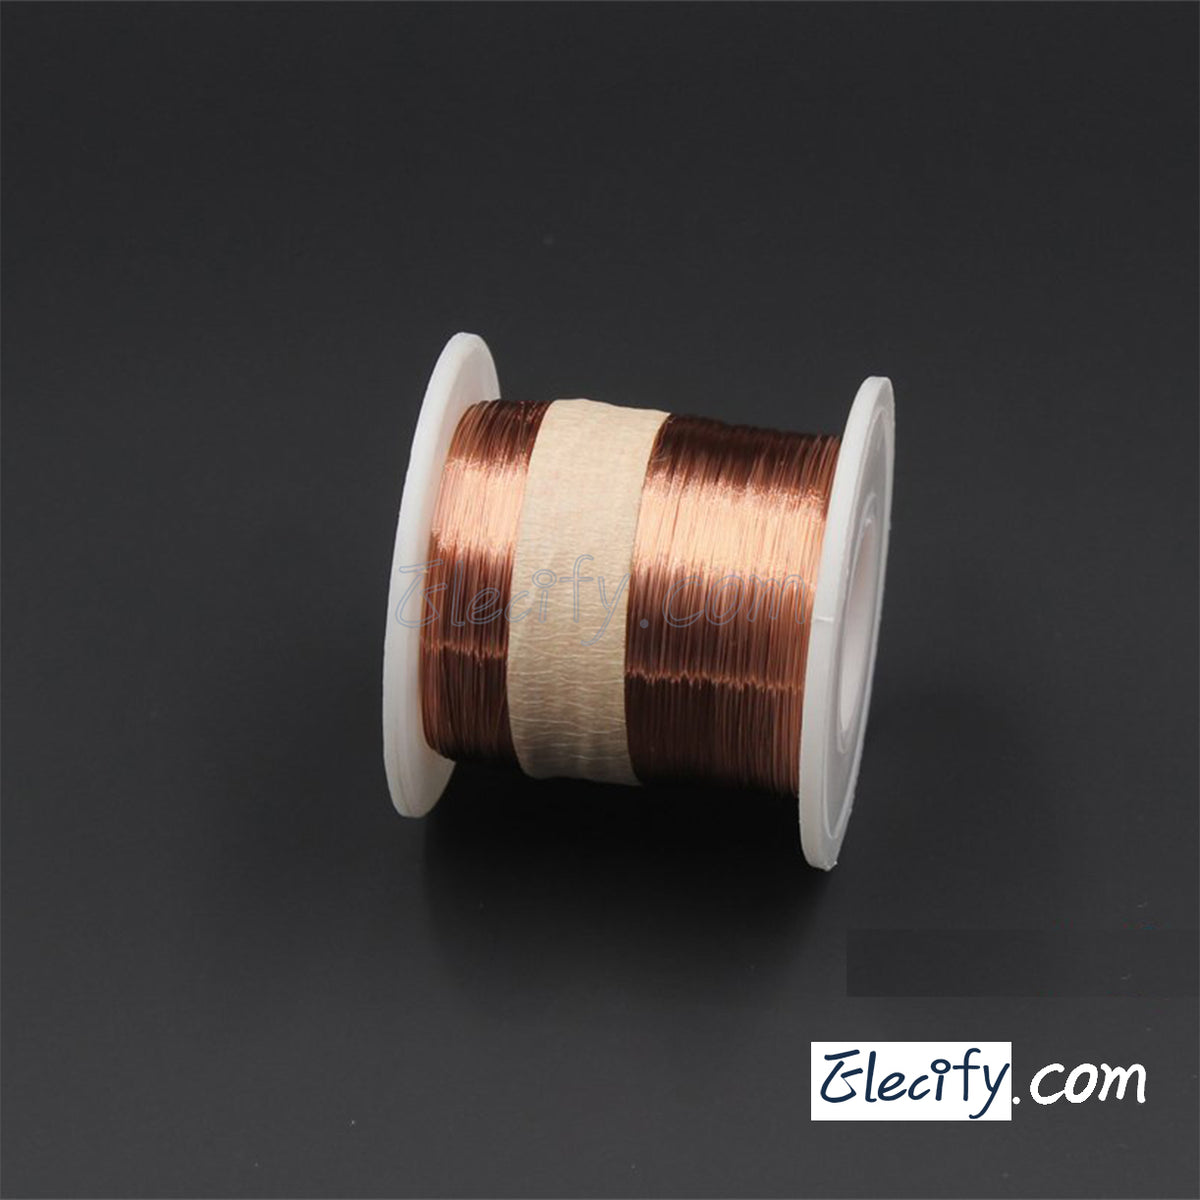 26 AWG Solid Enameled Bare Copper Magnet Wire - 1/4 lb Spool